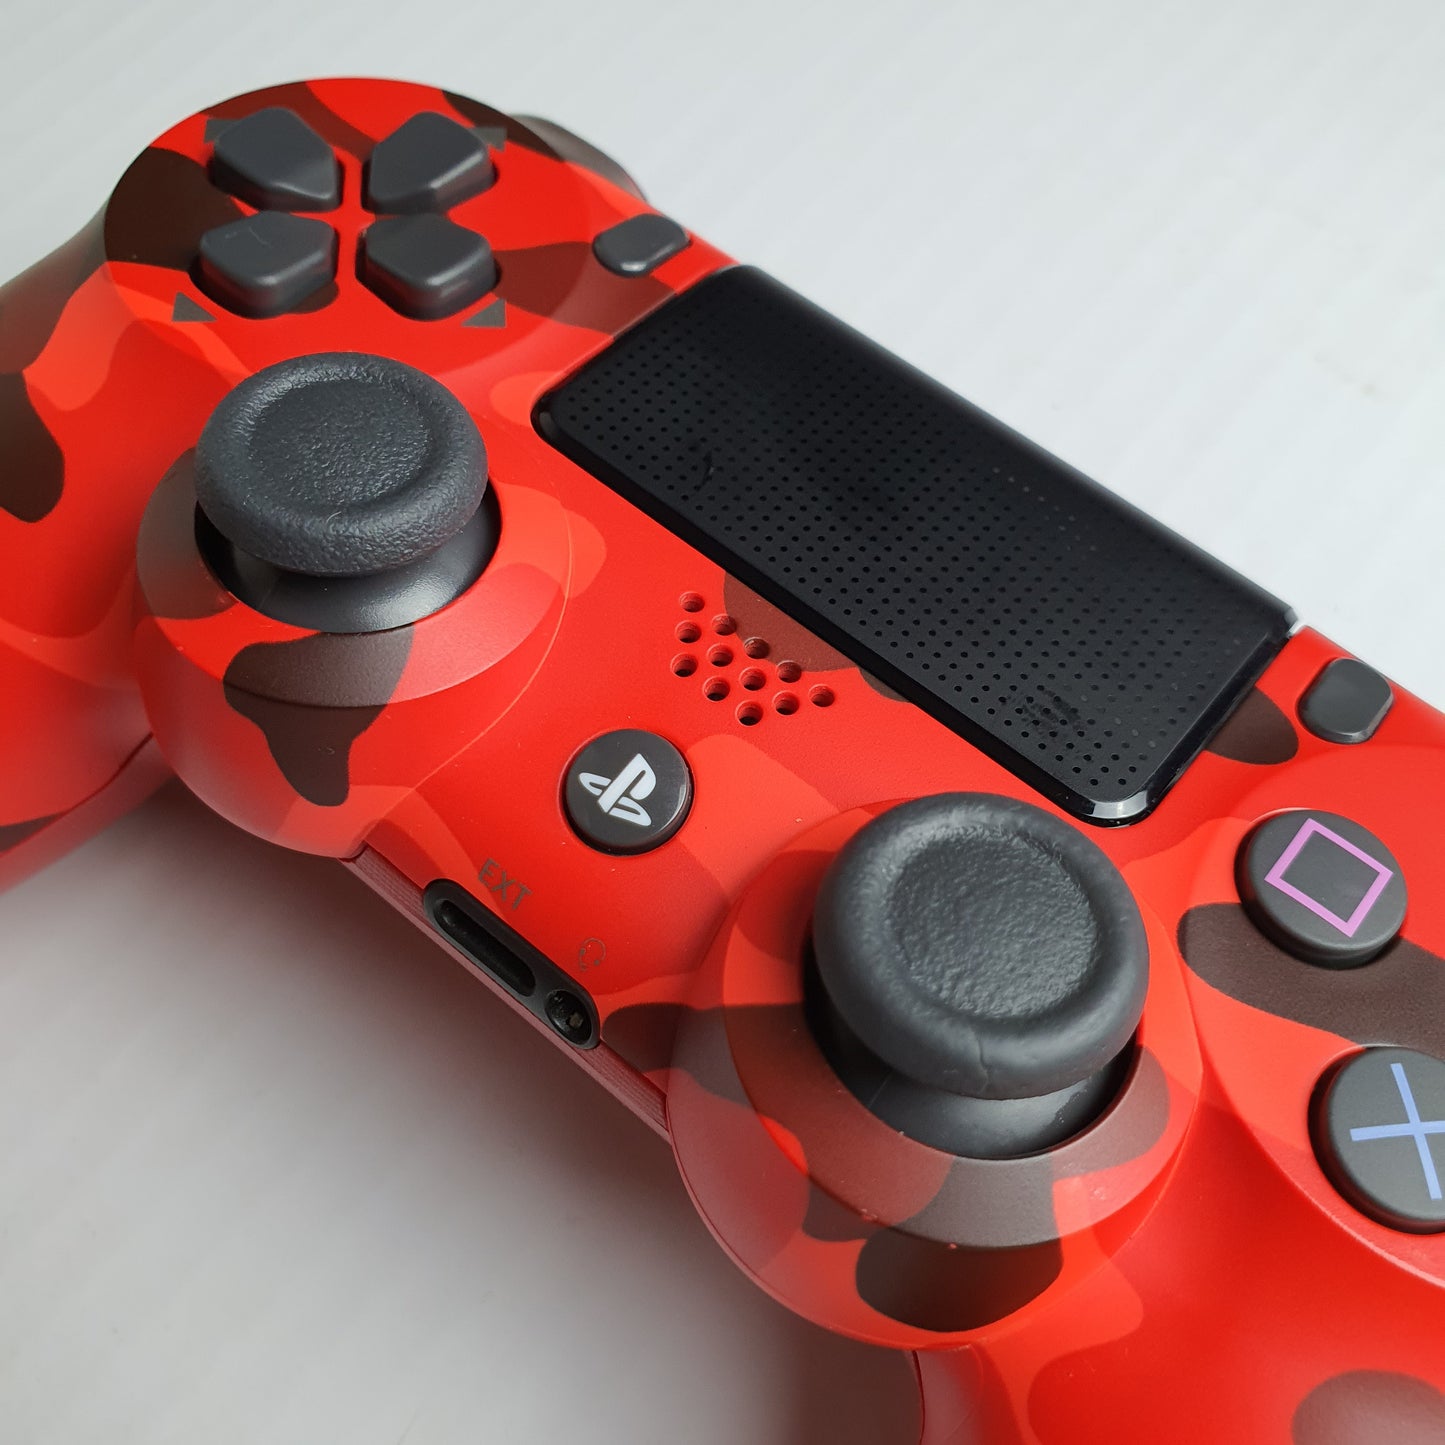 Official Sony PlayStation PS4 Red Camouflage Dualshock 4 Wireless Controller